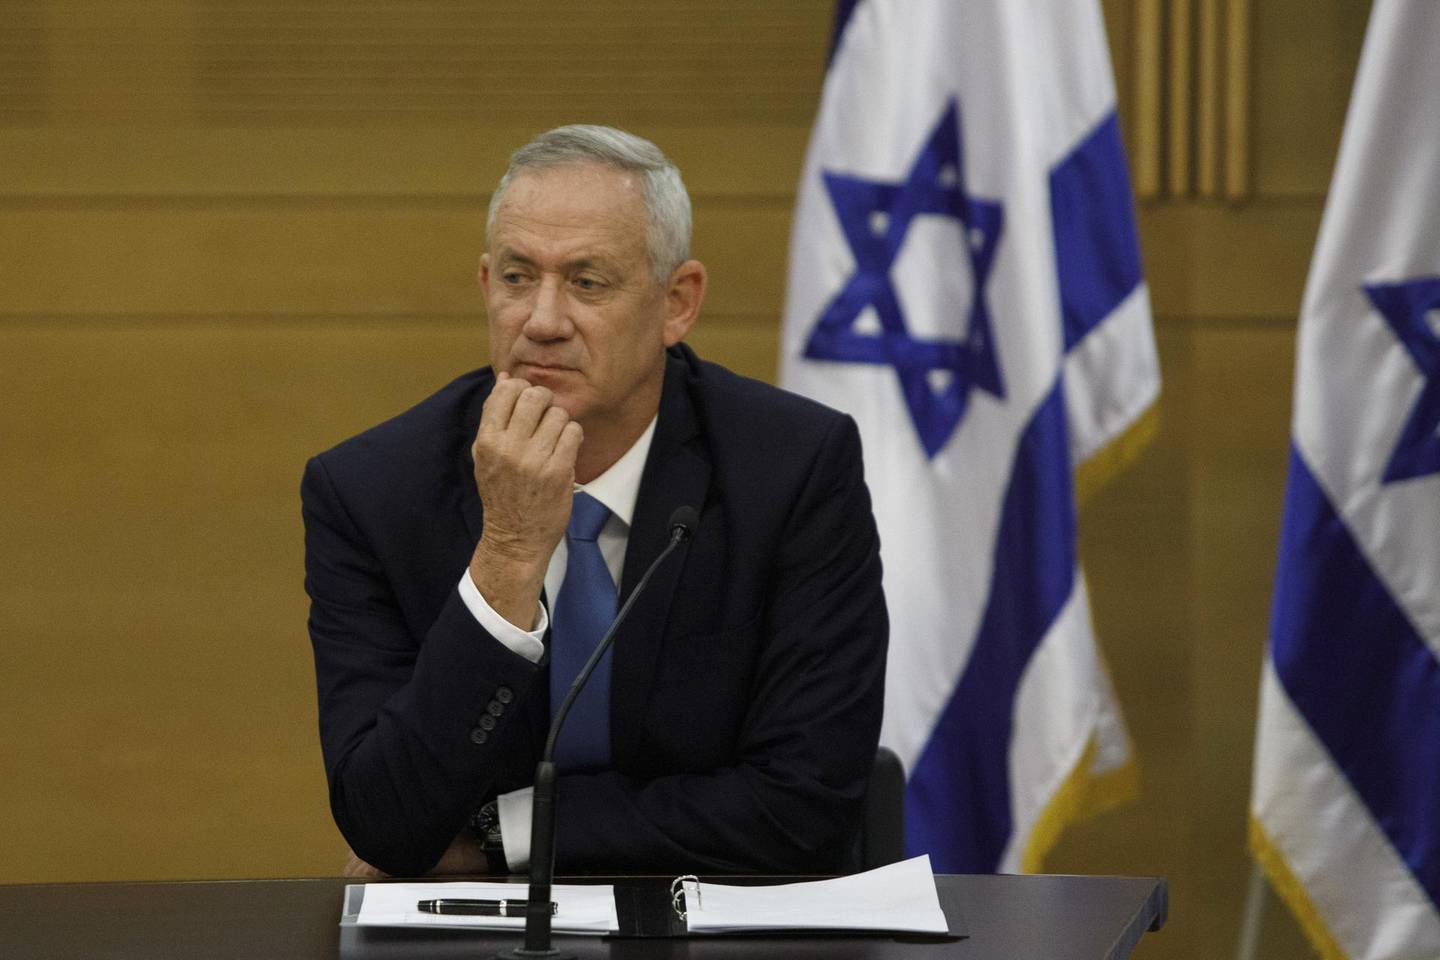 Benny Gantz, leader of the Blue and White party, pauses during a faction meeting at the Knesset in Jerusalem, Israel, on Monday, Oct. 28, 2019. Benny Gantz, the biggest threat to Benjamin Netanyahu’s record-breaking rule, was assigned Wednesday night to form Israel’s next government and end the political paralysis that has gripped the country for nearly a year. Photographer: Kobi Wolf/Bloomberg